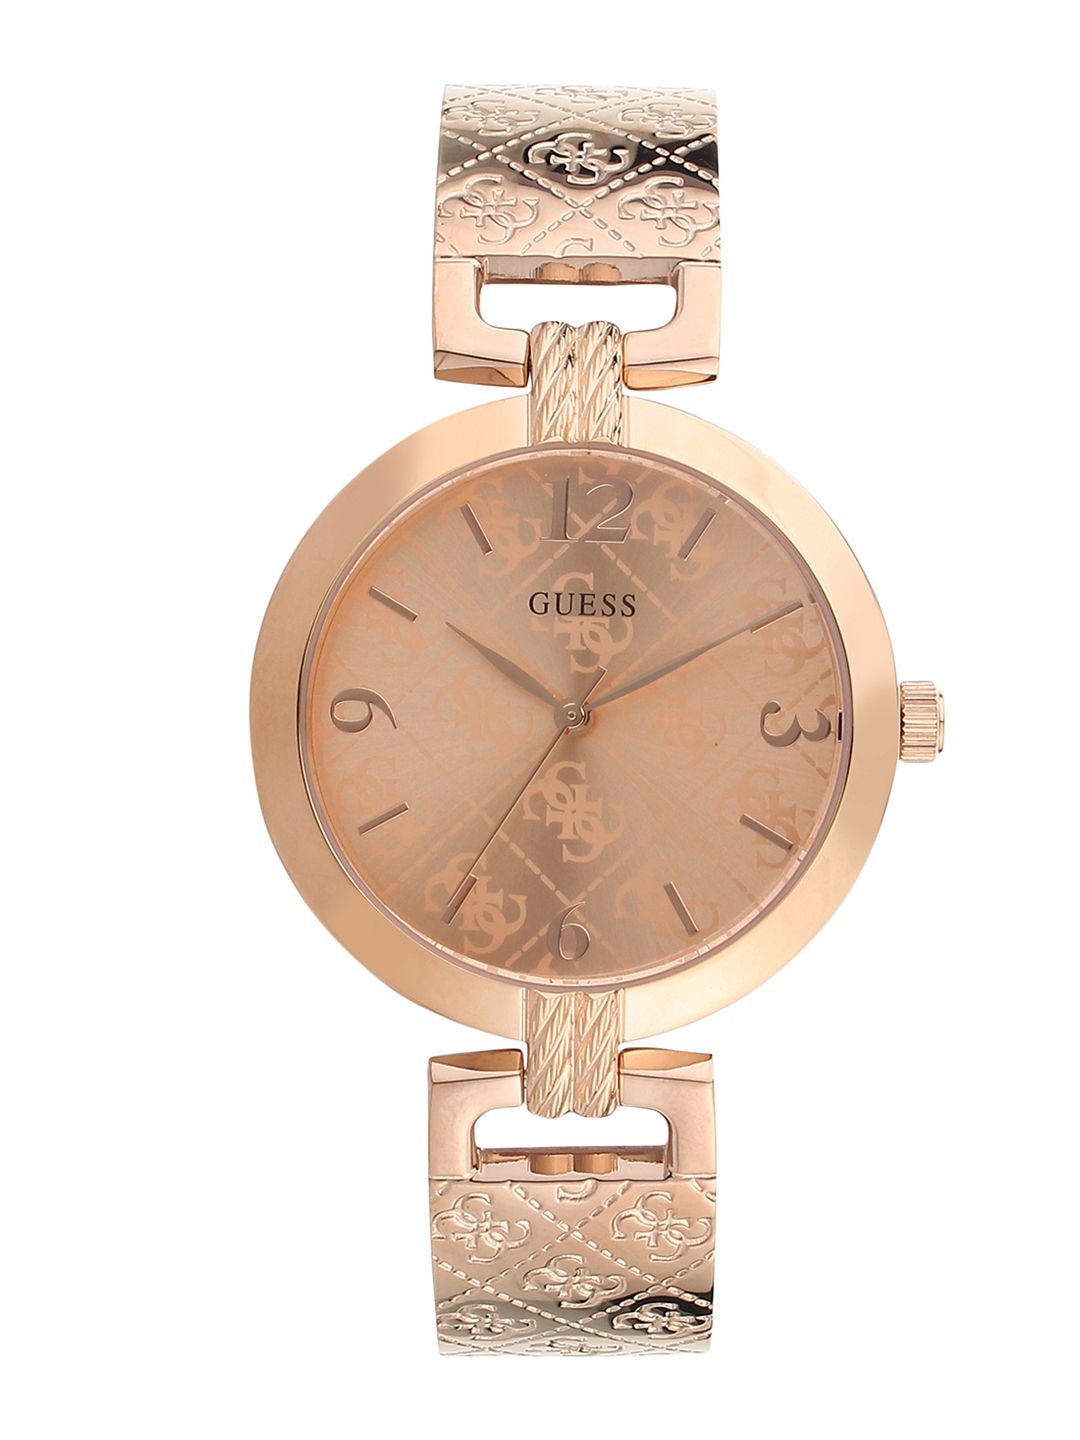 GUESS Women Rose Analogue Watch W1228L3 Price in India